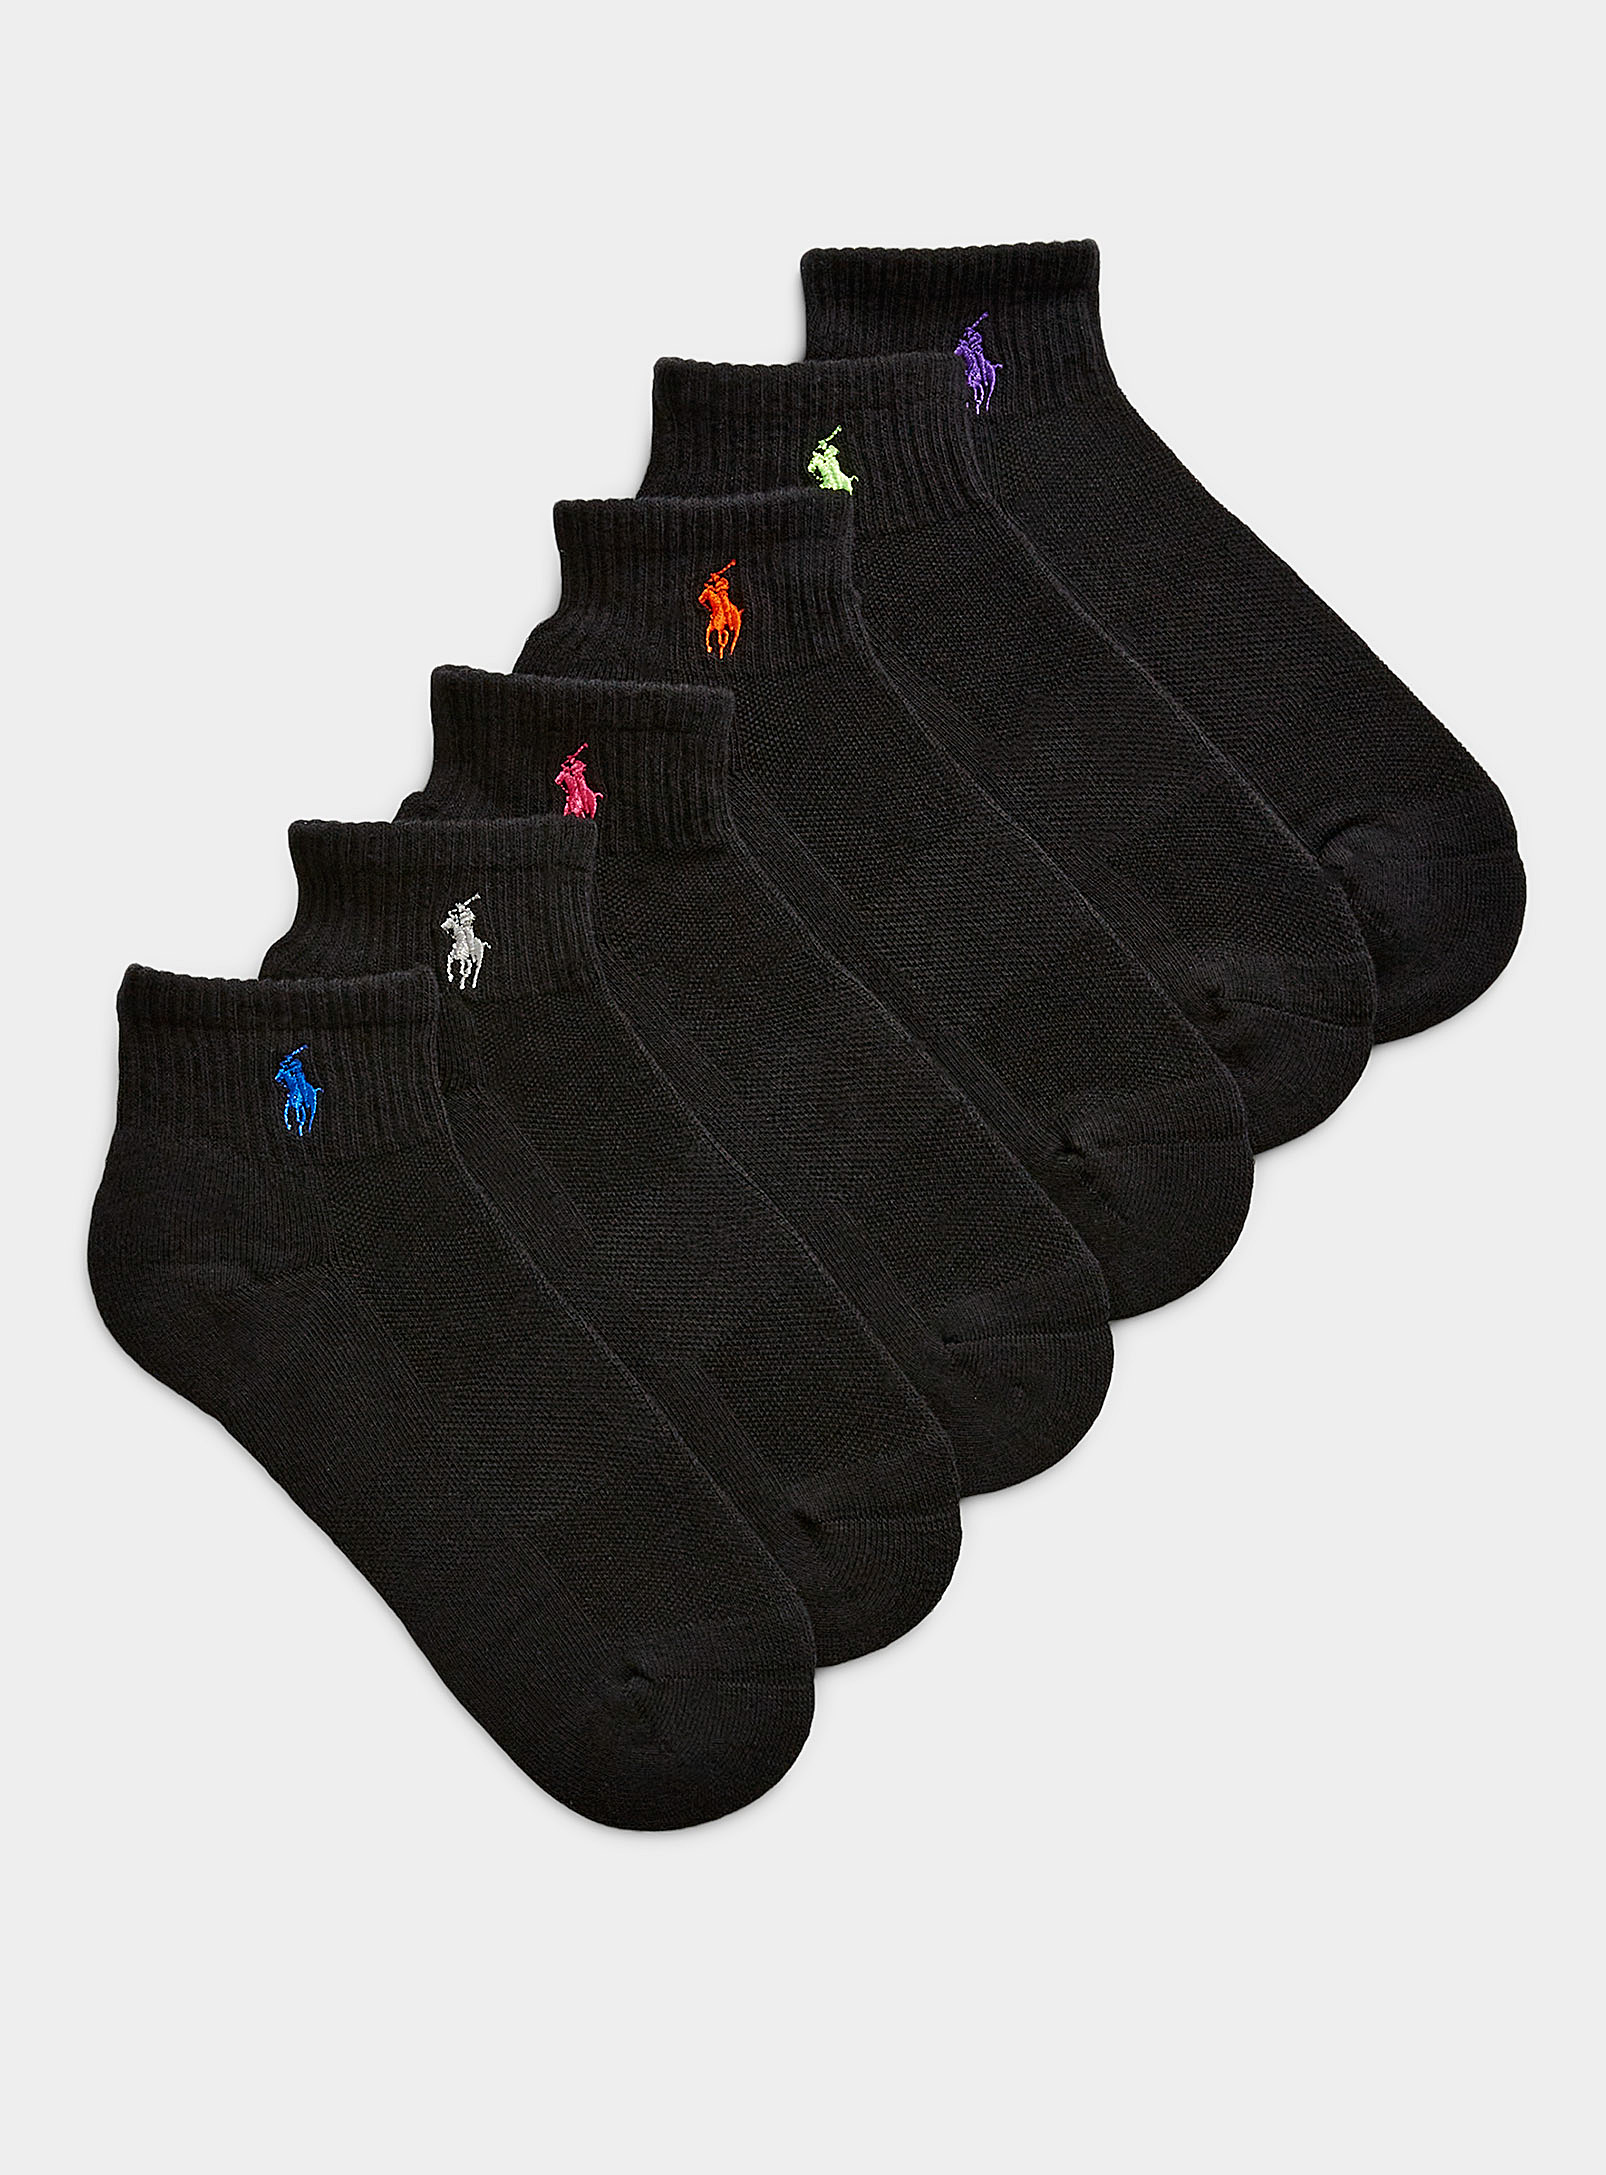 Polo Ralph Lauren Embroidered Logo Ankle Socks Set Of 6 Pairs In Black